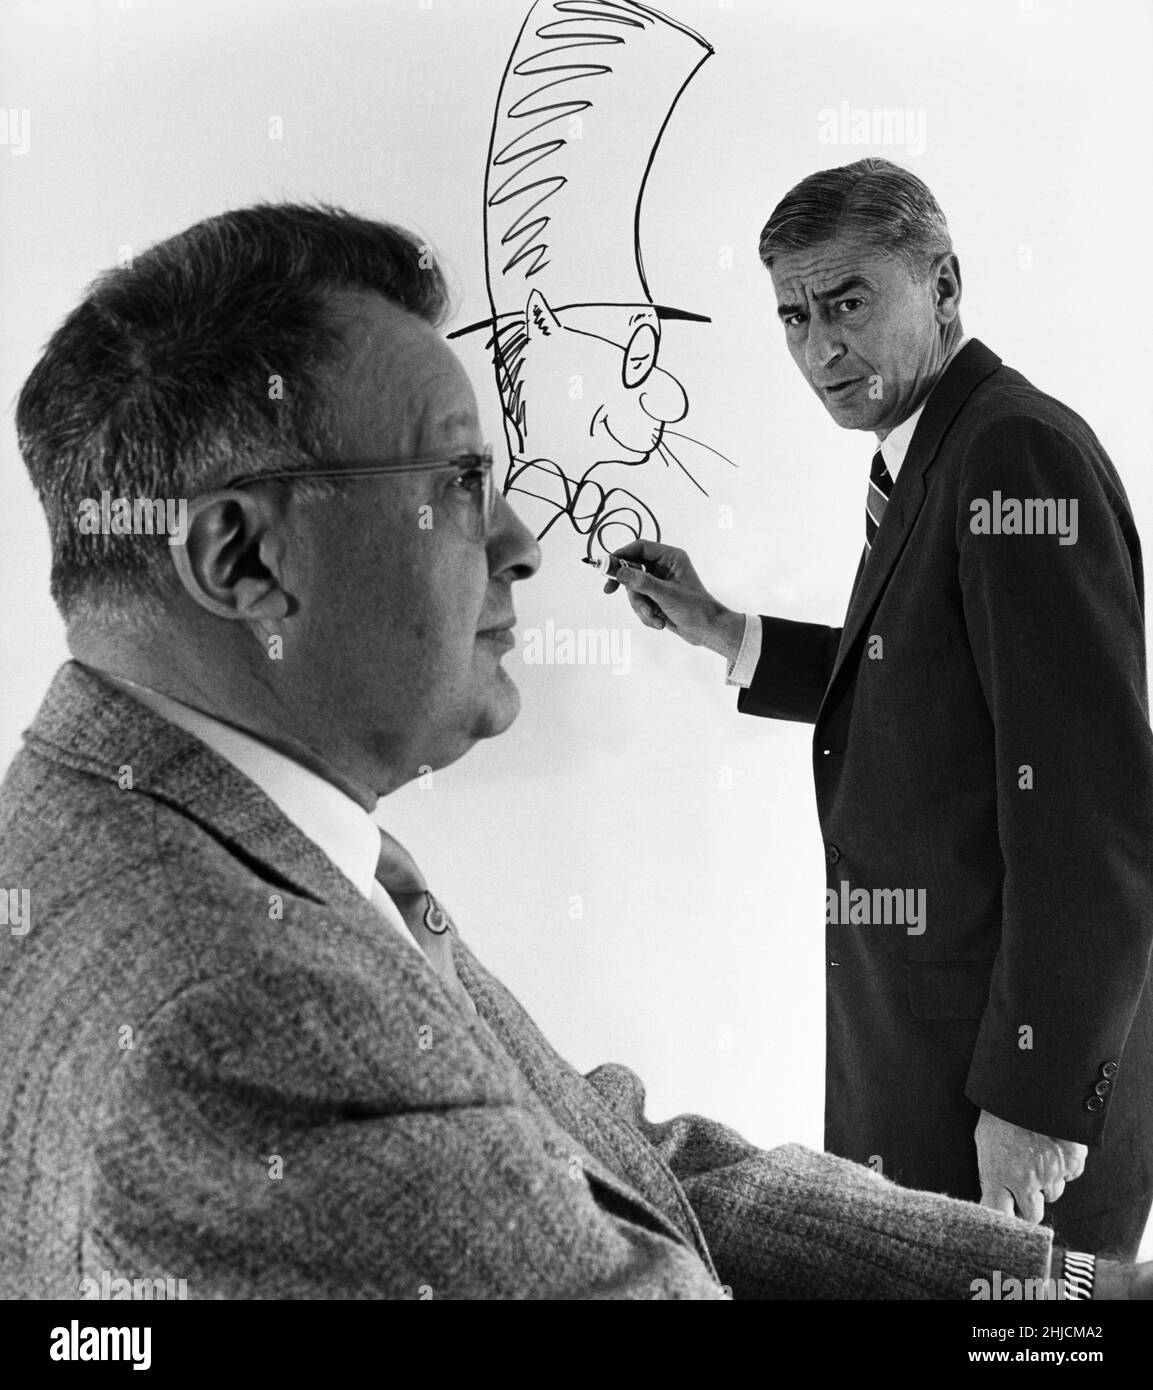 Dr. Seuss (1904-1991) sketching Clifton Fadiman (1904-1999) as the Cat in the Hat. Clifton Fadiman was an editor, author and well-known radio and television personality. He was the radio quiz show host of 'Information Please!', chief editor at Simon & Schuster, and literary editor of The New Yorker magazine in the 1930s and 1940s, among other employments. Dr. Seuss, whose real name was Theodor Seuss Geisel, was the author and illustrator of many beloved children's books, including 'Green Eggs and Ham,' 'The Sneetches' and 'The Cat in the Hat.' Stock Photo